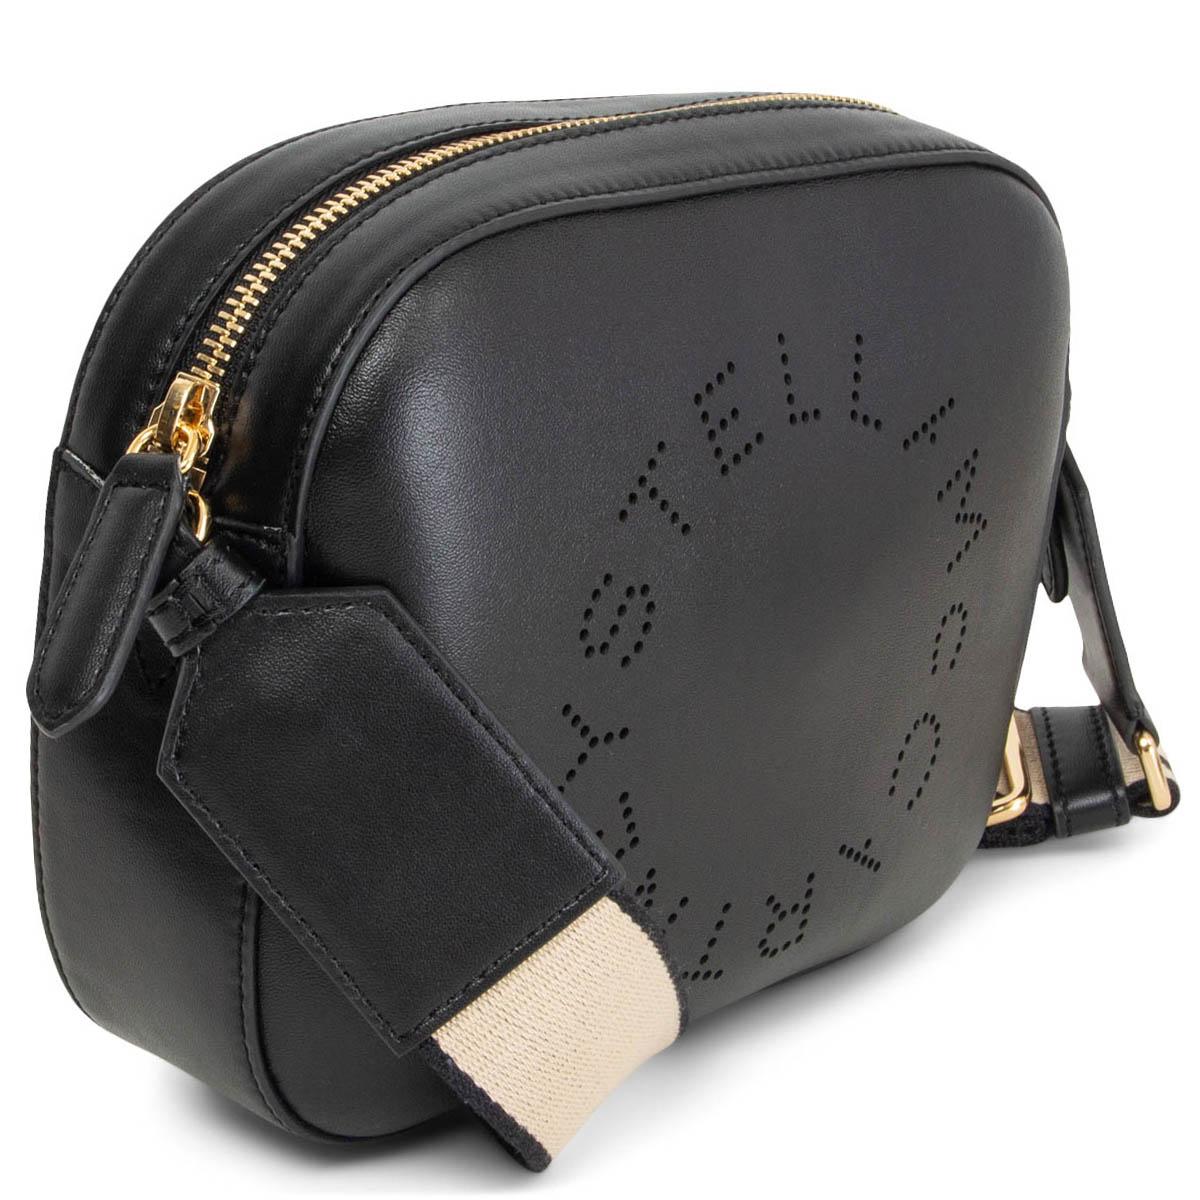 100% authentic Stella McCartney Logo Strap Shoulder Camera Bag crafted from black artificial leather that features a detachable and adjustable shoulder strap, a top zip fastening, decorative perforations and a front centre logo stamp. Lined in ochre